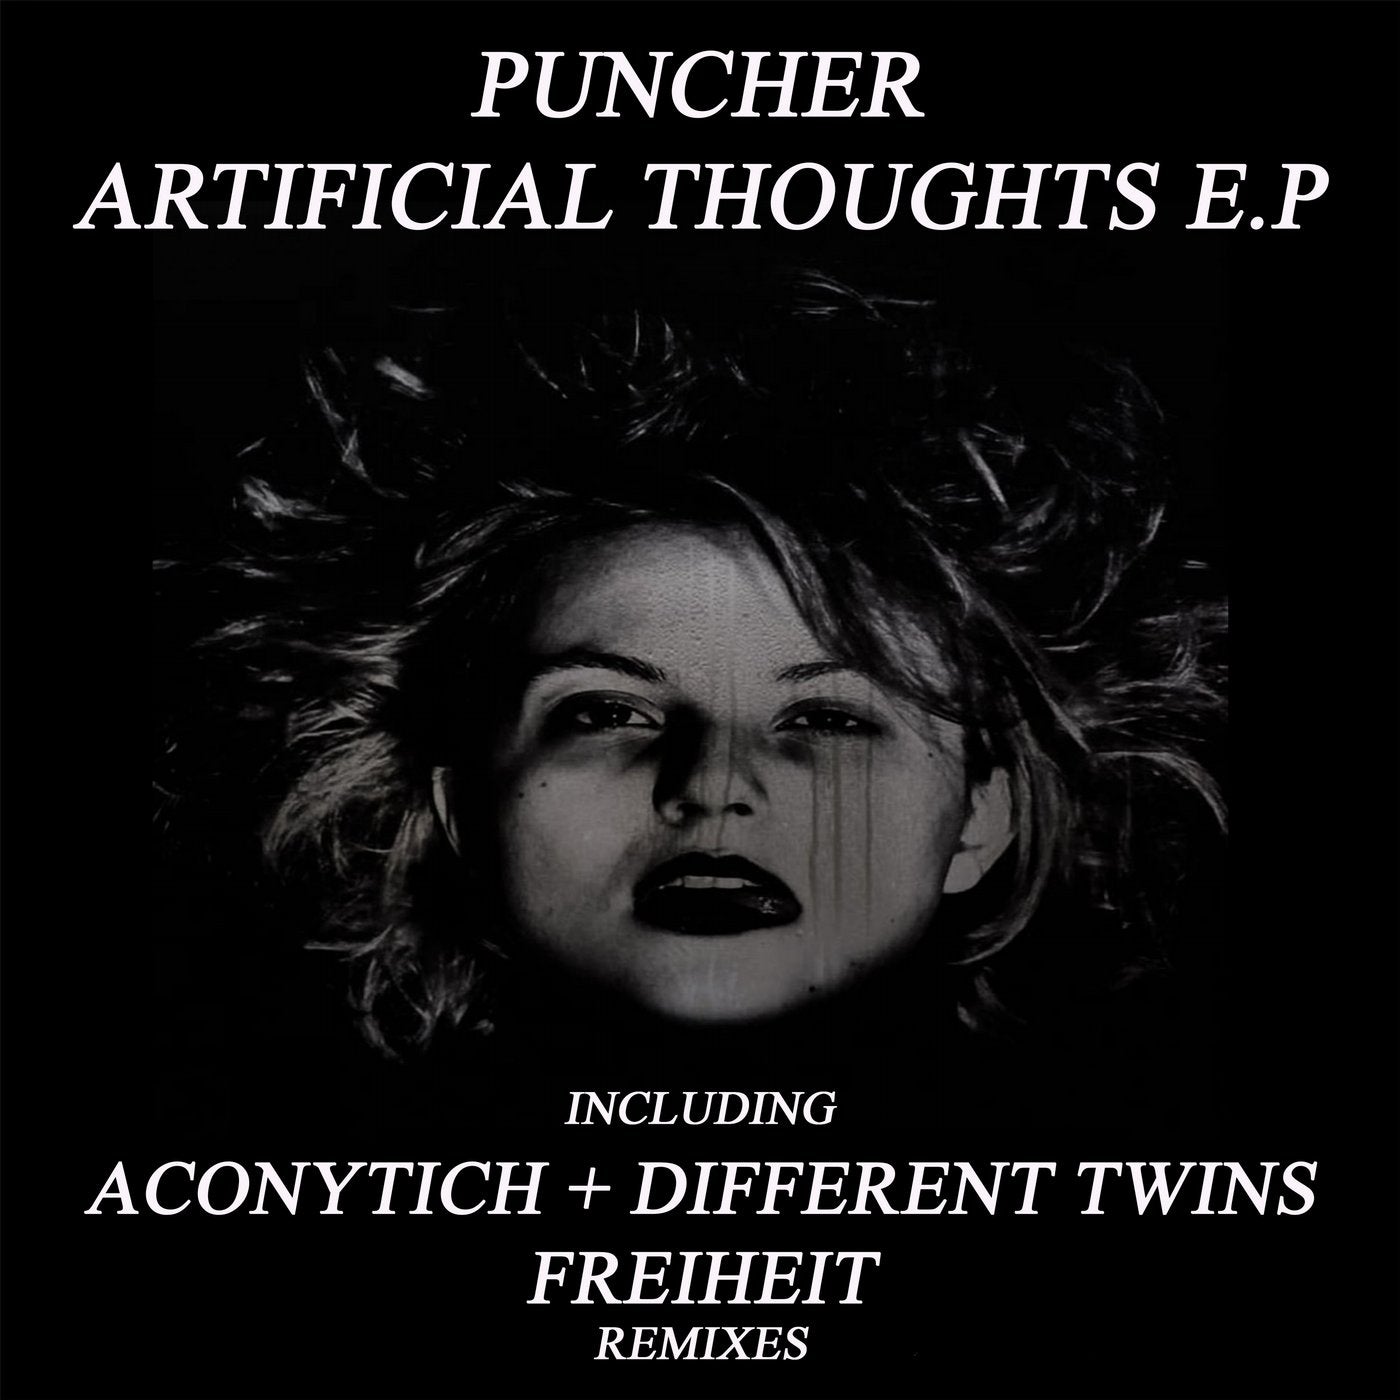 Artificial Thoughts E.P